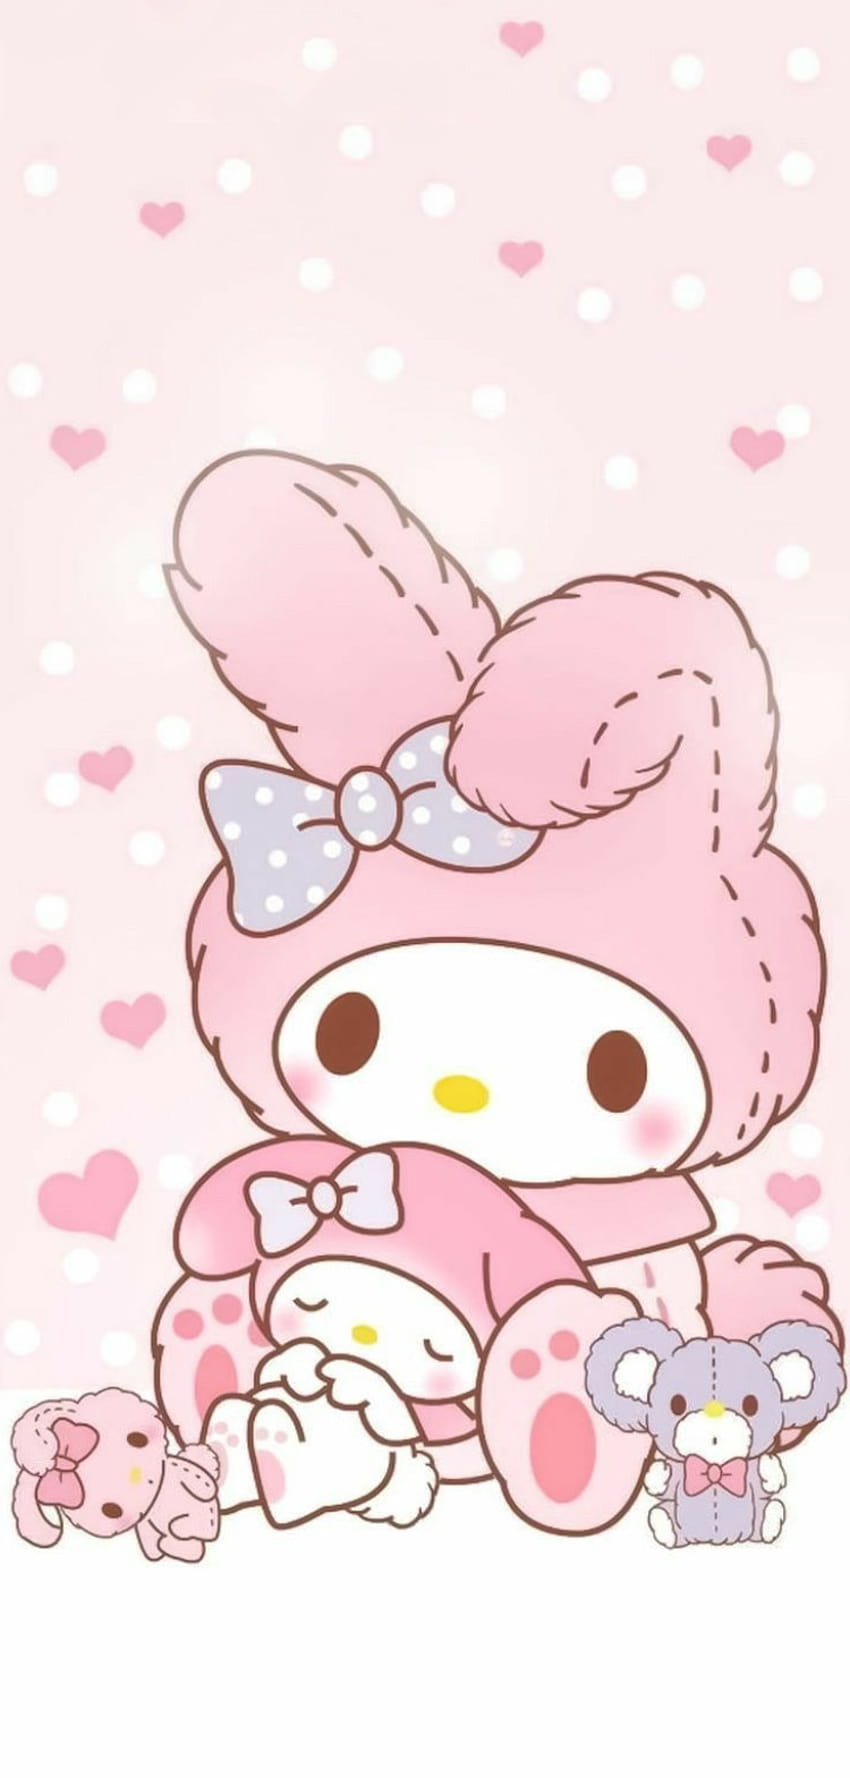  Be Positive   MY MELODY WALLPAPER This is the matching